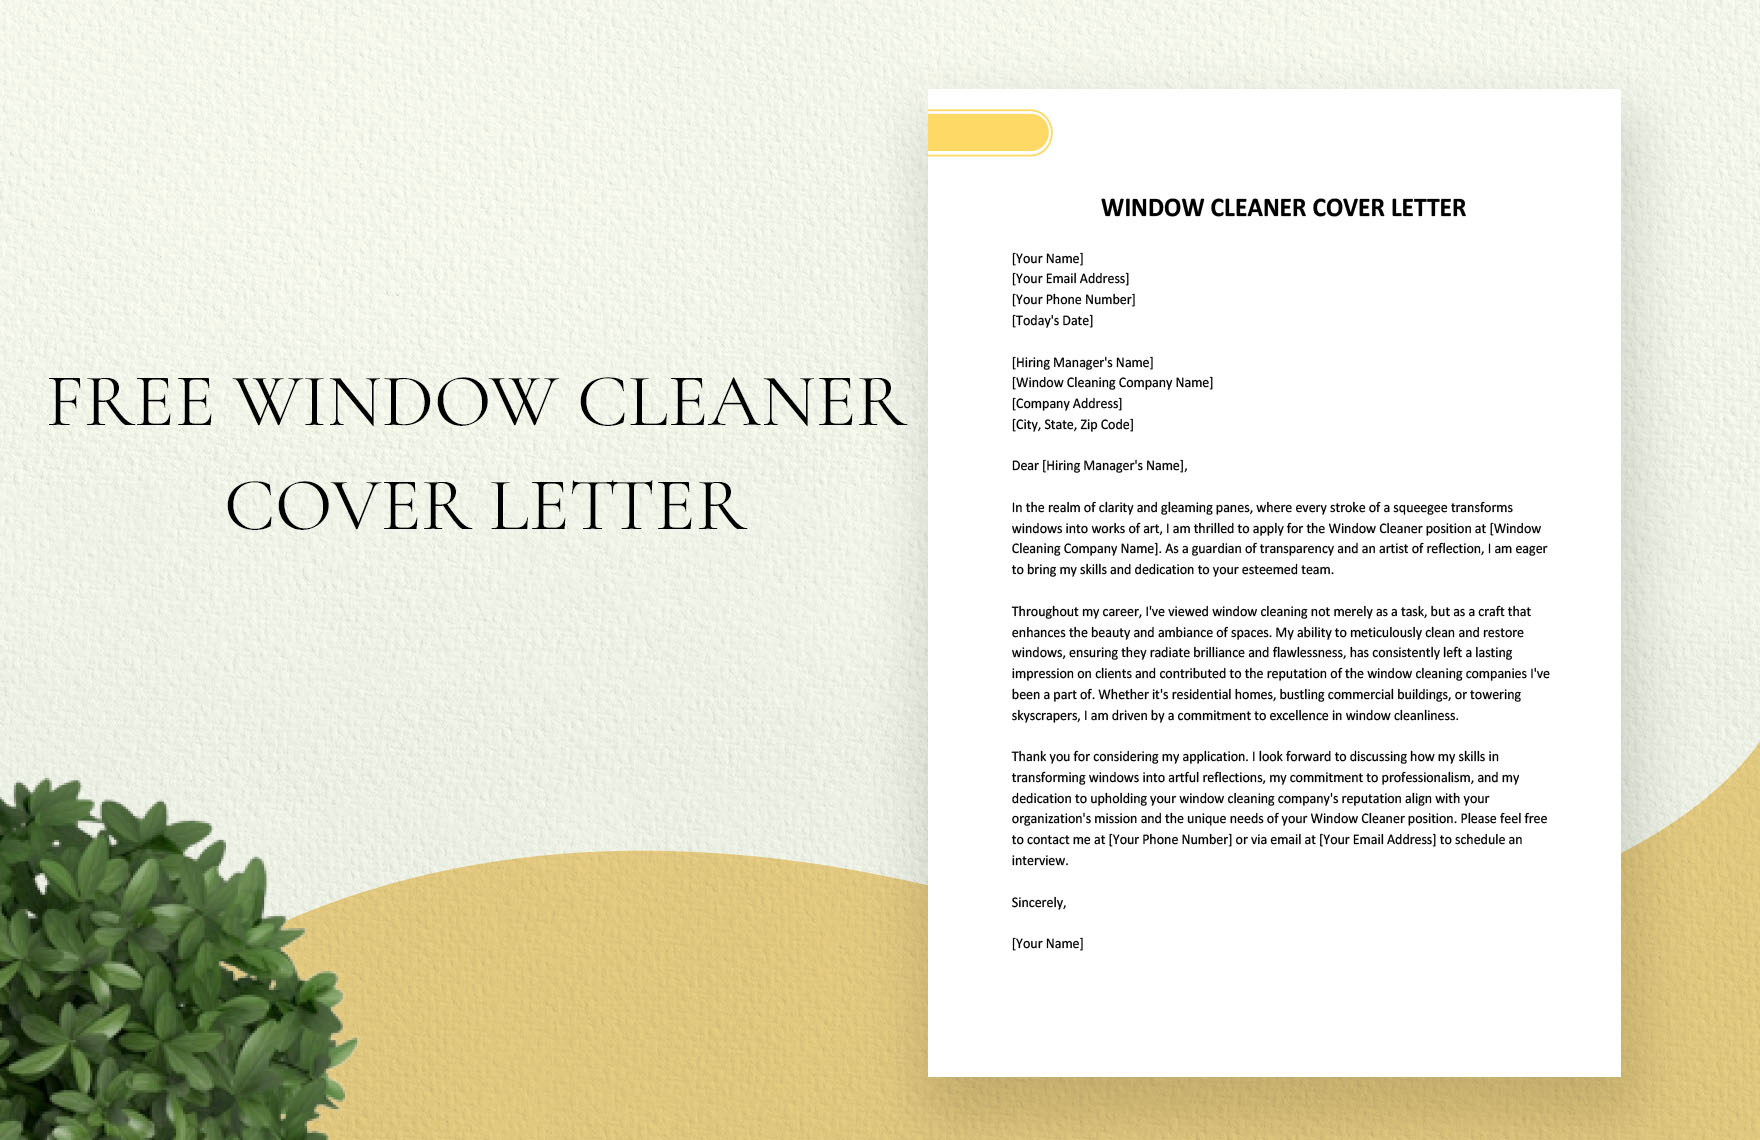 Window Cleaner Cover Letter in Word, Google Docs